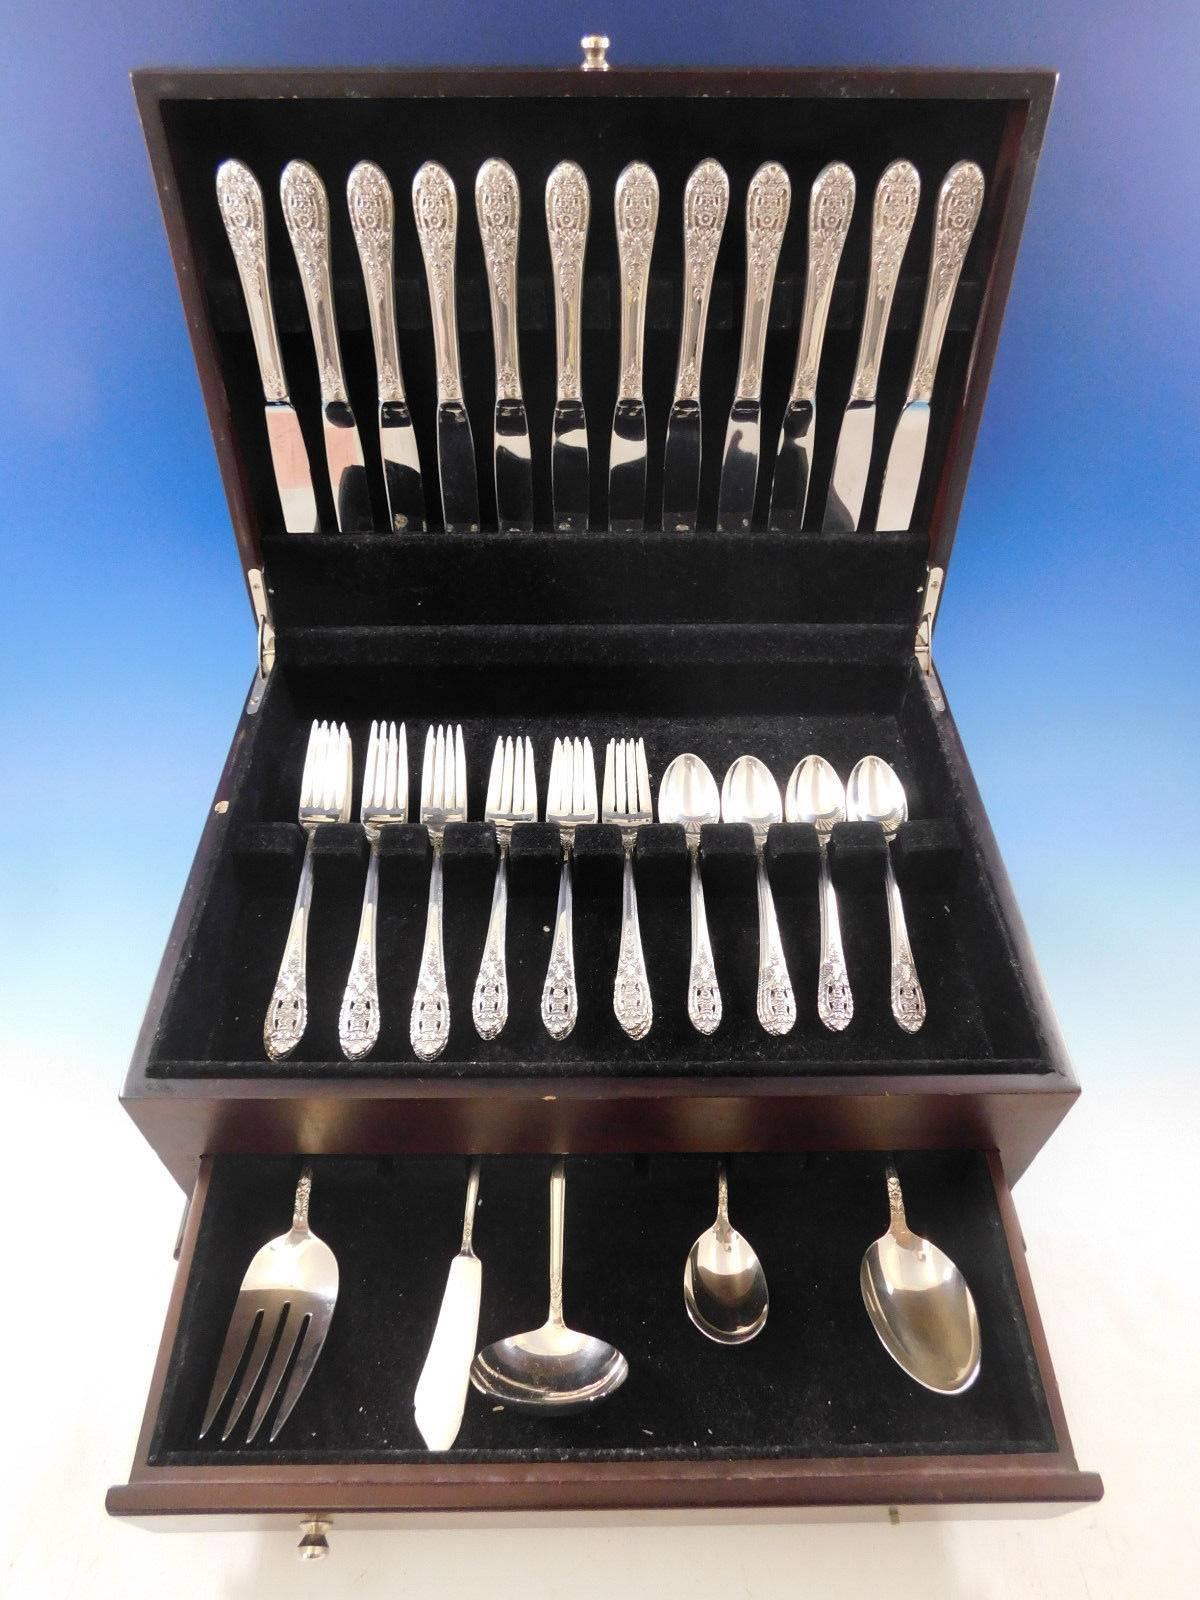 Crown Princess by International/Fine Arts sterling silver Flatware set, 53 pieces. This set includes:

12 Knives, 9 1/8